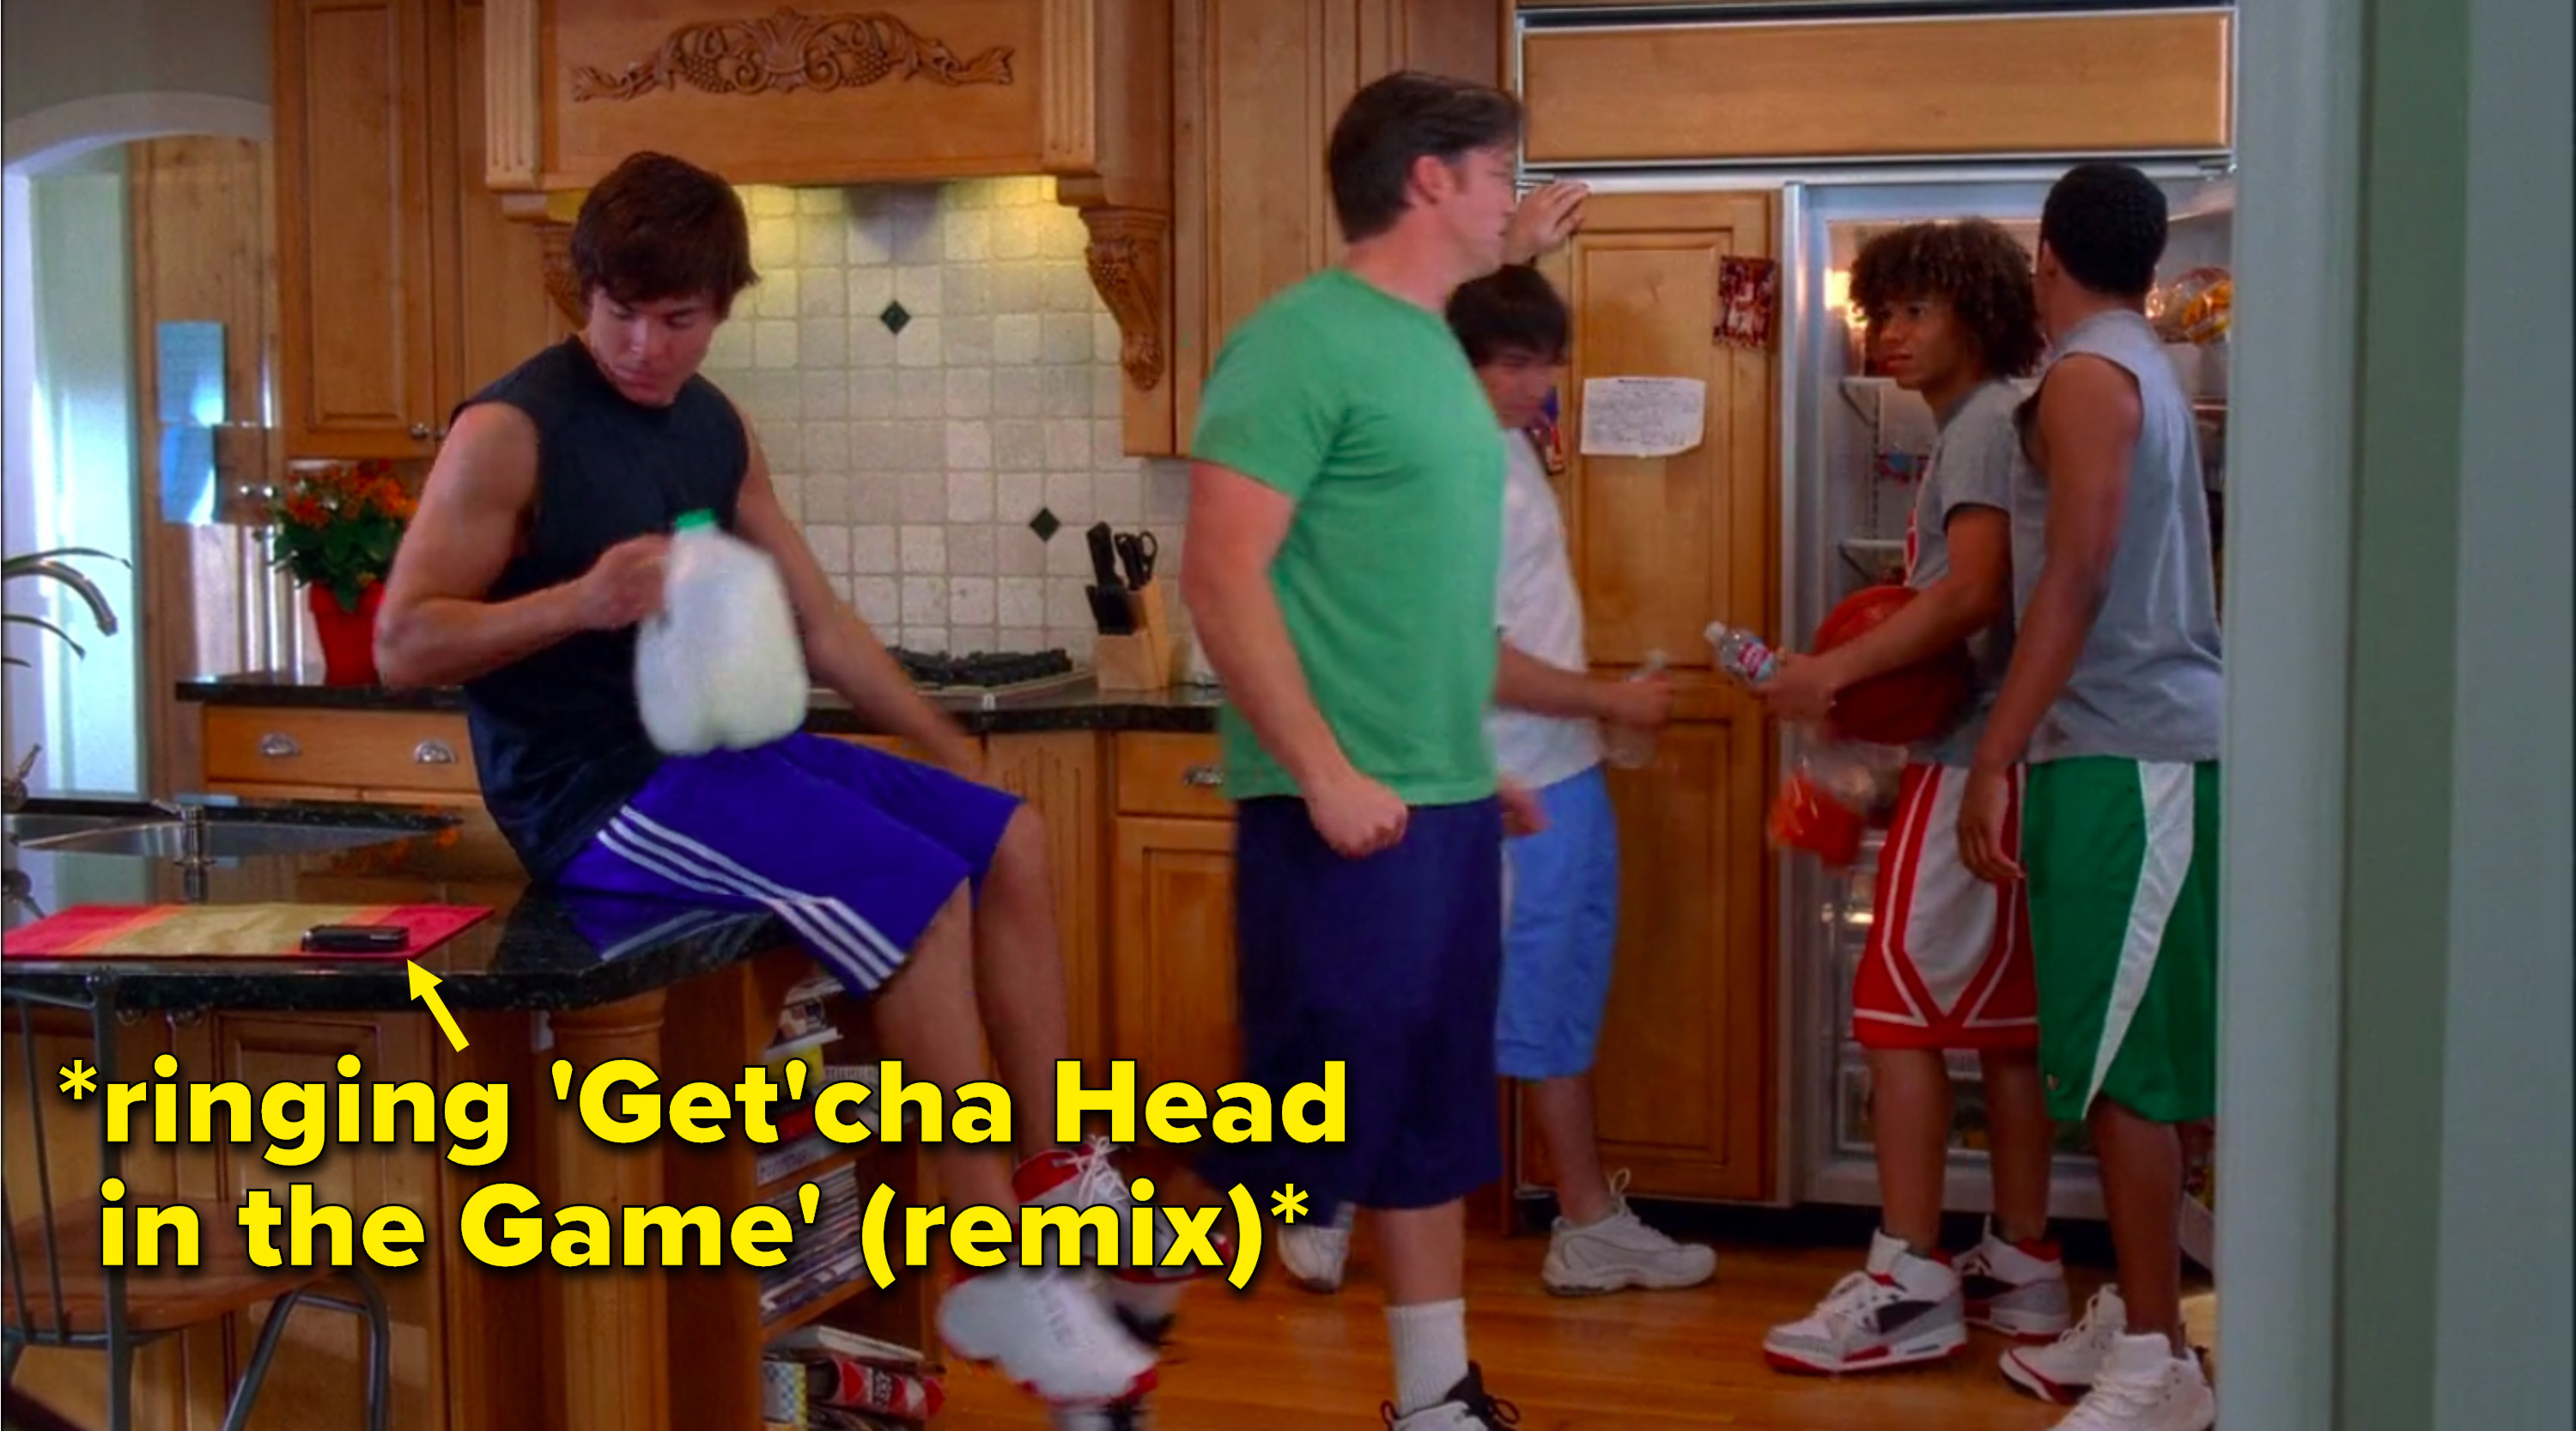 Troy, Chad, Zeke, Jason and Troy&#x27;s dad are in Troy&#x27;s kitchen and Troy&#x27;s phone rings a &quot;Get&#x27;cha Head in the Game&quot; remix